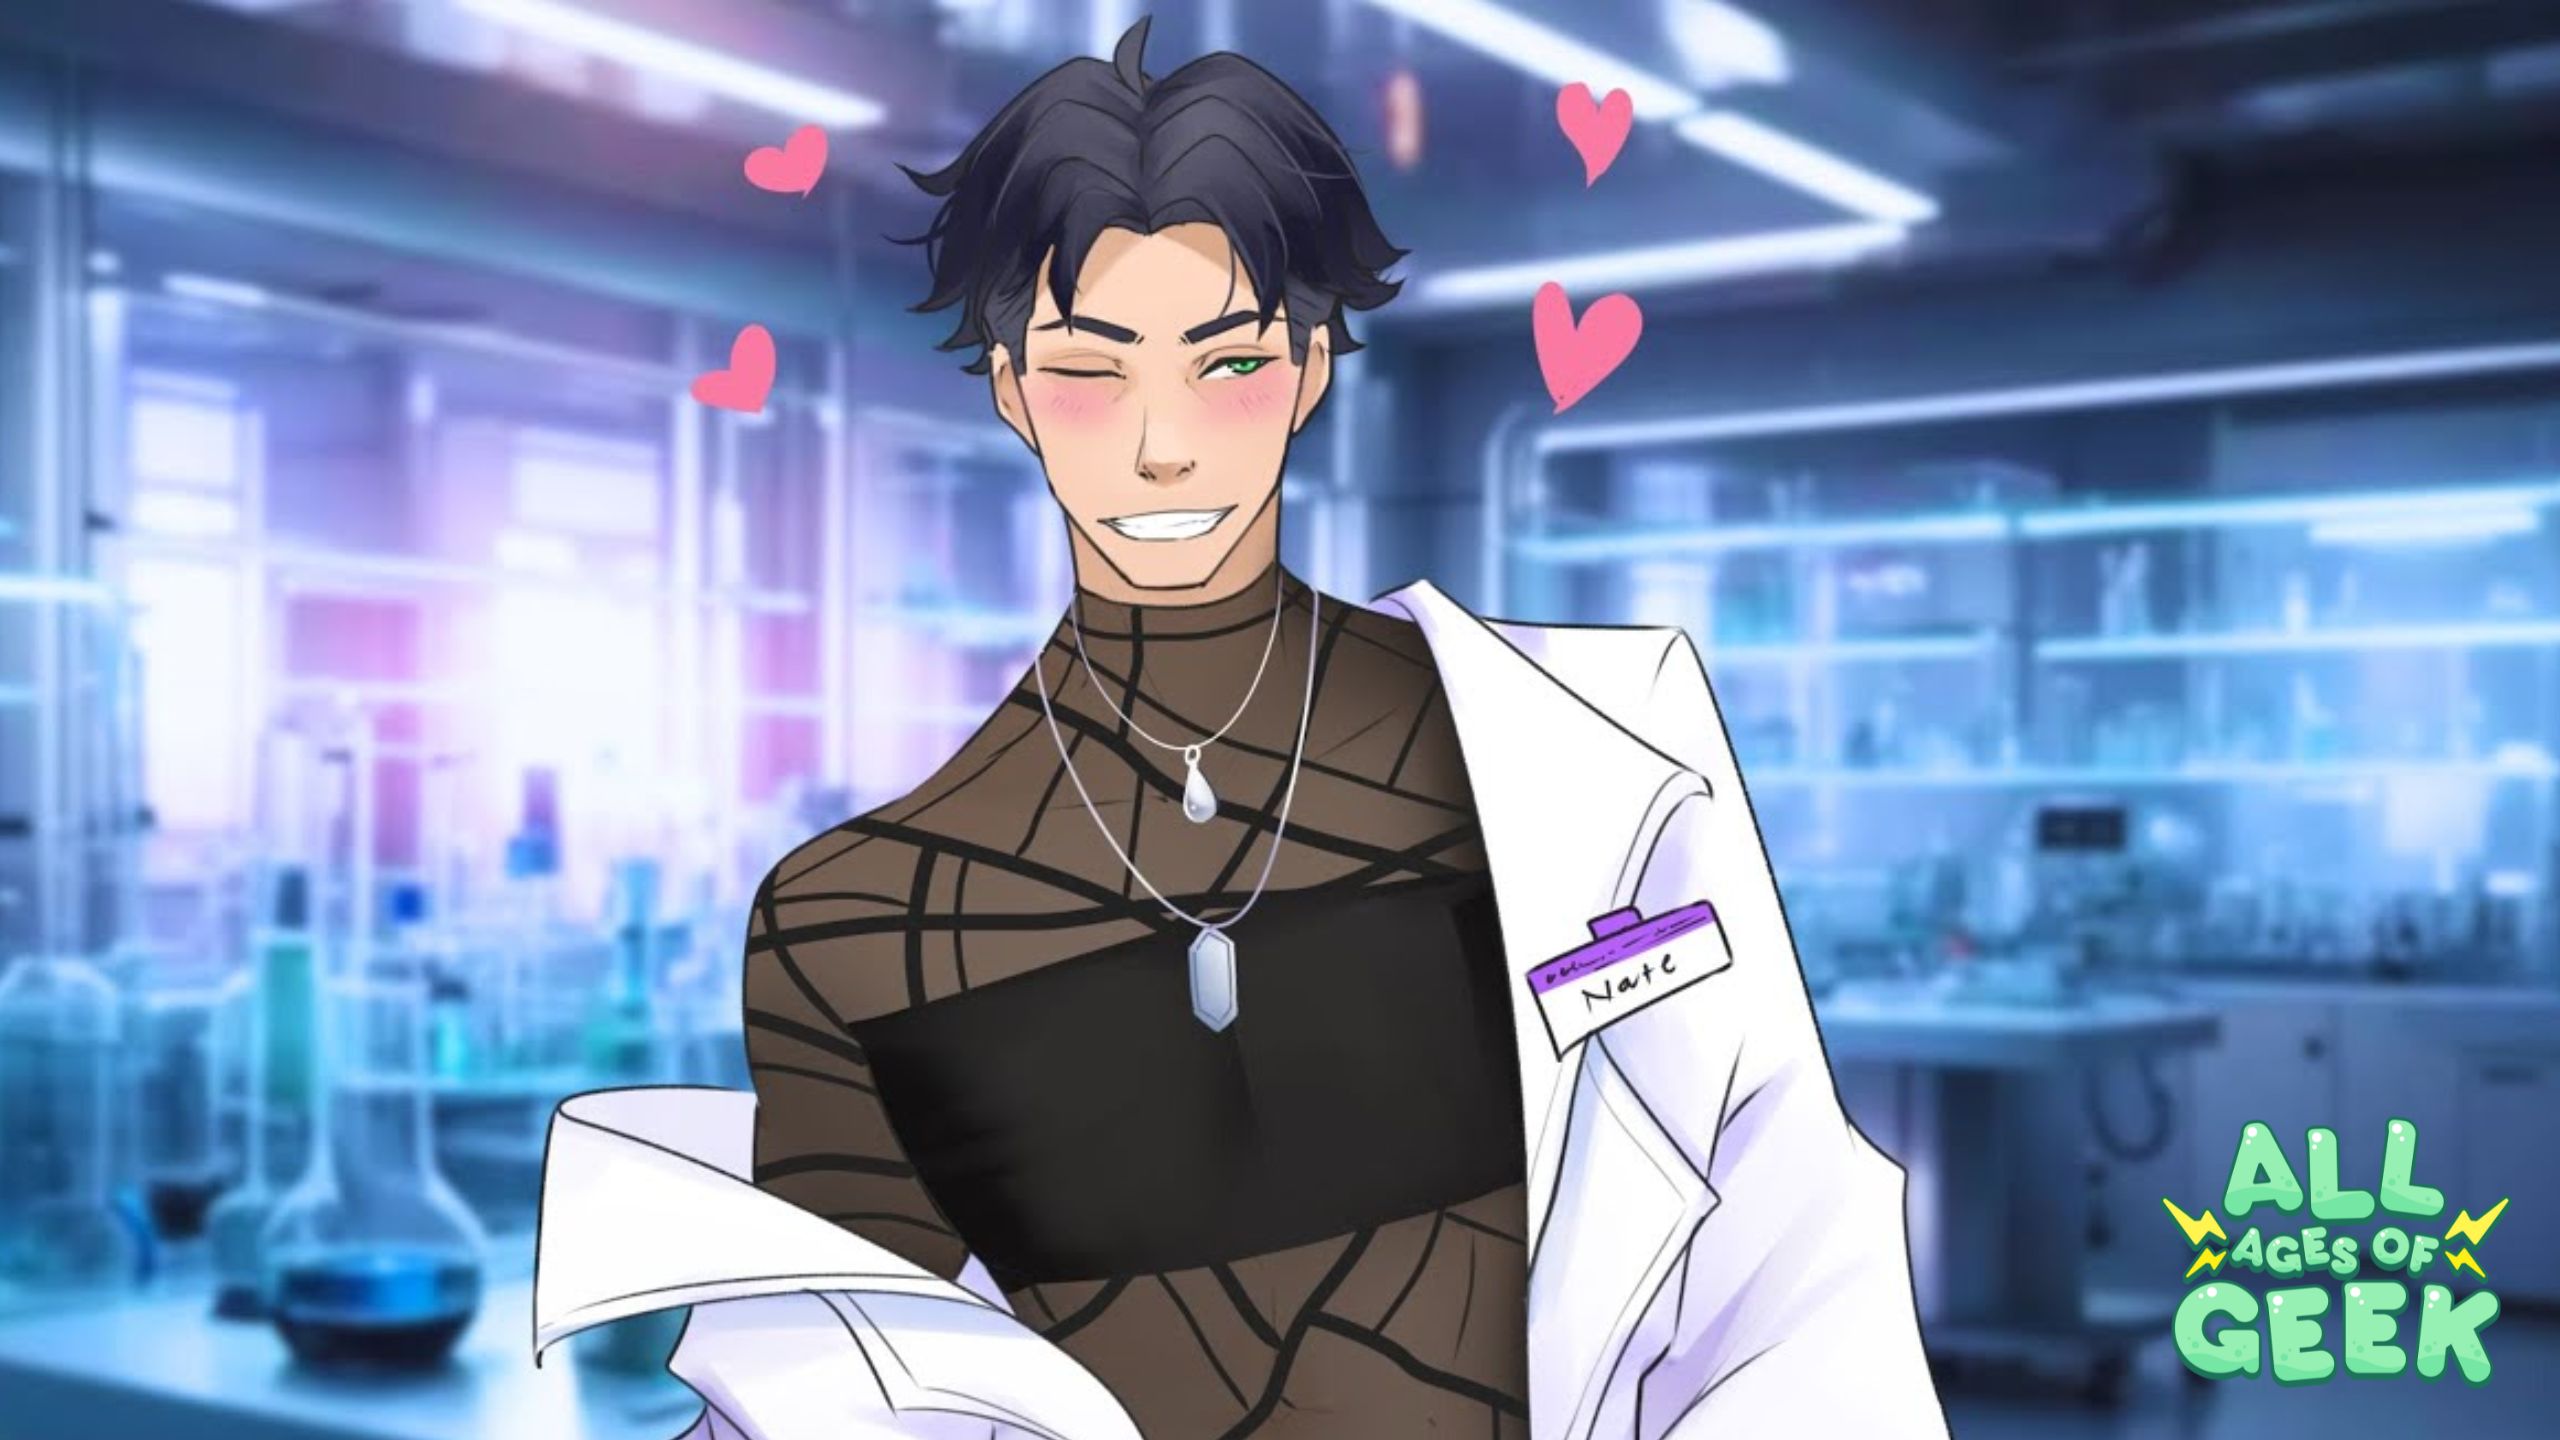 Nate, a character from "I Married a Monster on a Hill," is winking and smiling in a laboratory setting. He is wearing a white lab coat over a stylish black outfit with geometric patterns. Pink hearts float around his head, emphasizing his cheerful expression. The "All Ages of Geek" logo is displayed in the bottom right corner.